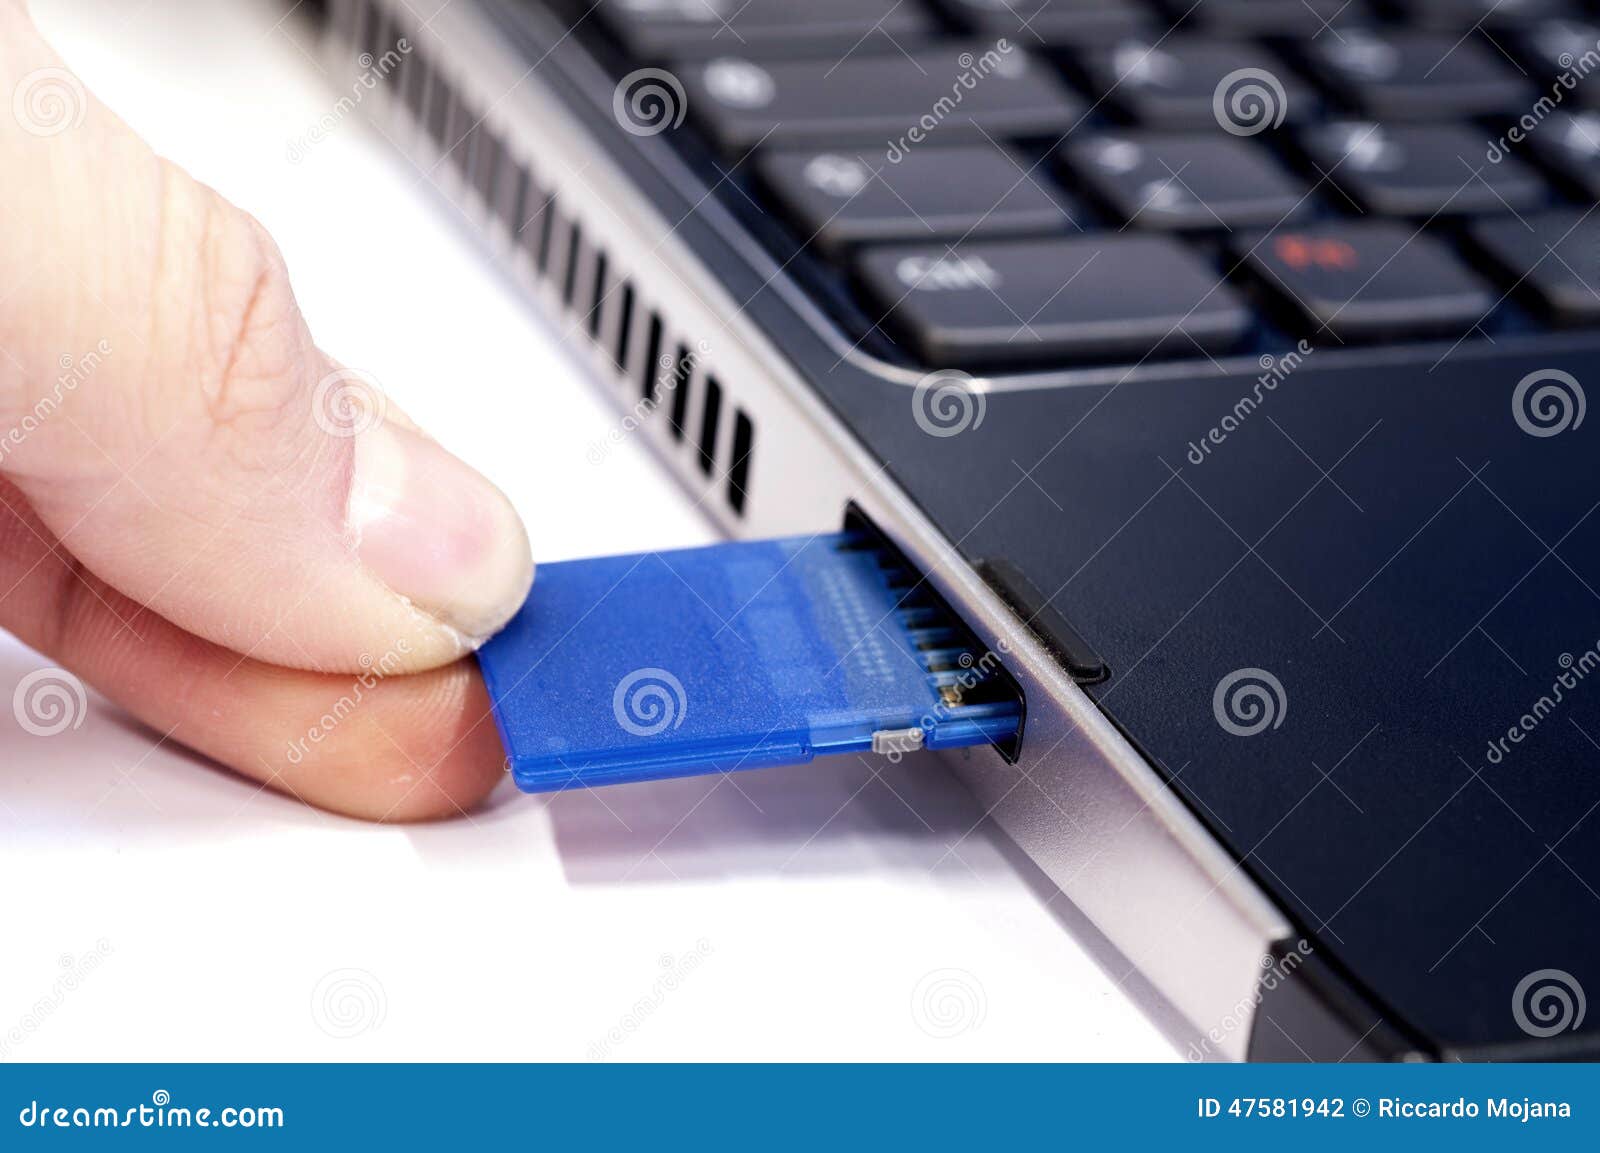 Hand Inserting SD Card In Laptop Stock Photo - Image of drive, compartment: 47581942